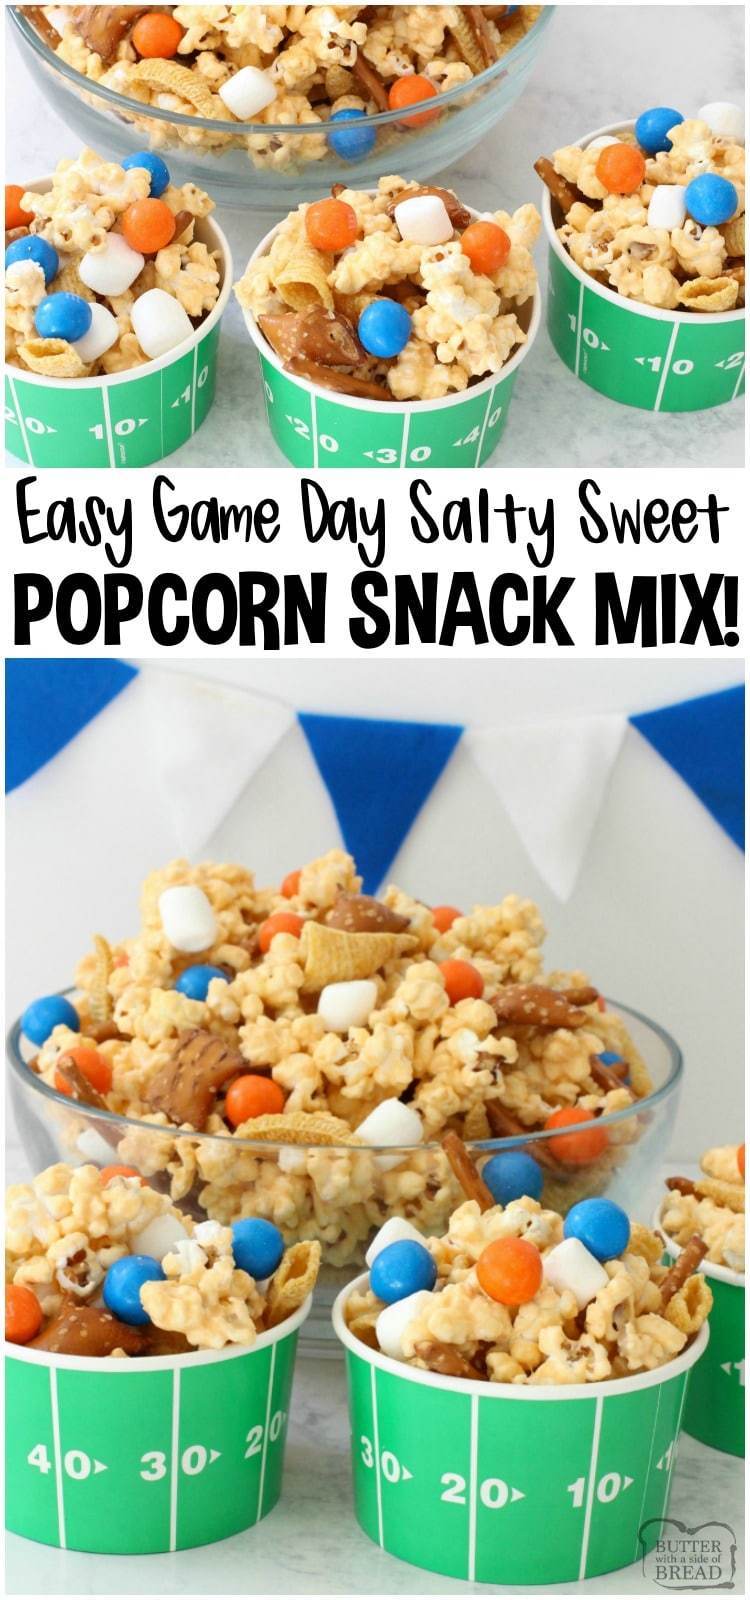 Easy Popcorn Snack Mix is sweet, salty, & perfect for excited sports fans! Customize candy colors to celebrate your team in this snack mix recipe! #snackmix #popcorn #candy #gameday #gamedayfood #superbowl #recipe from BUTTER WITH A SIDE OF BREAD